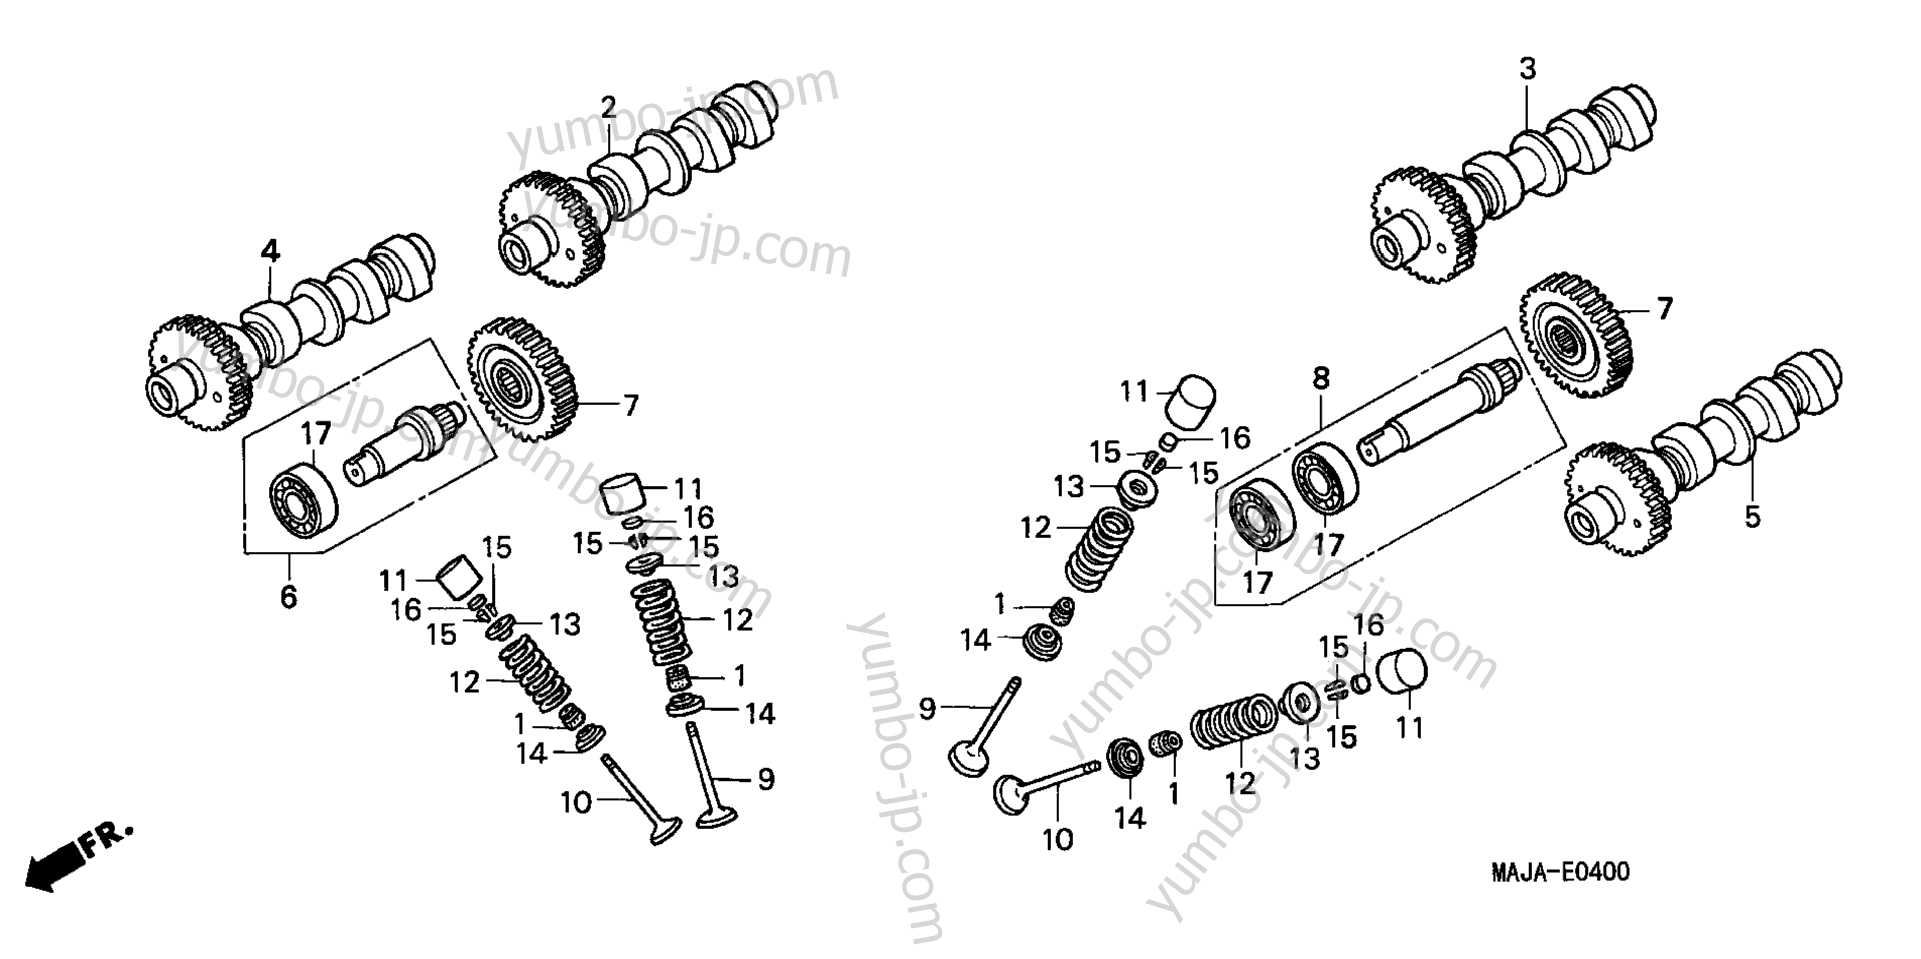 CAMSHAFT / VALVE for motorcycles HONDA ST1100A AC 1999 year